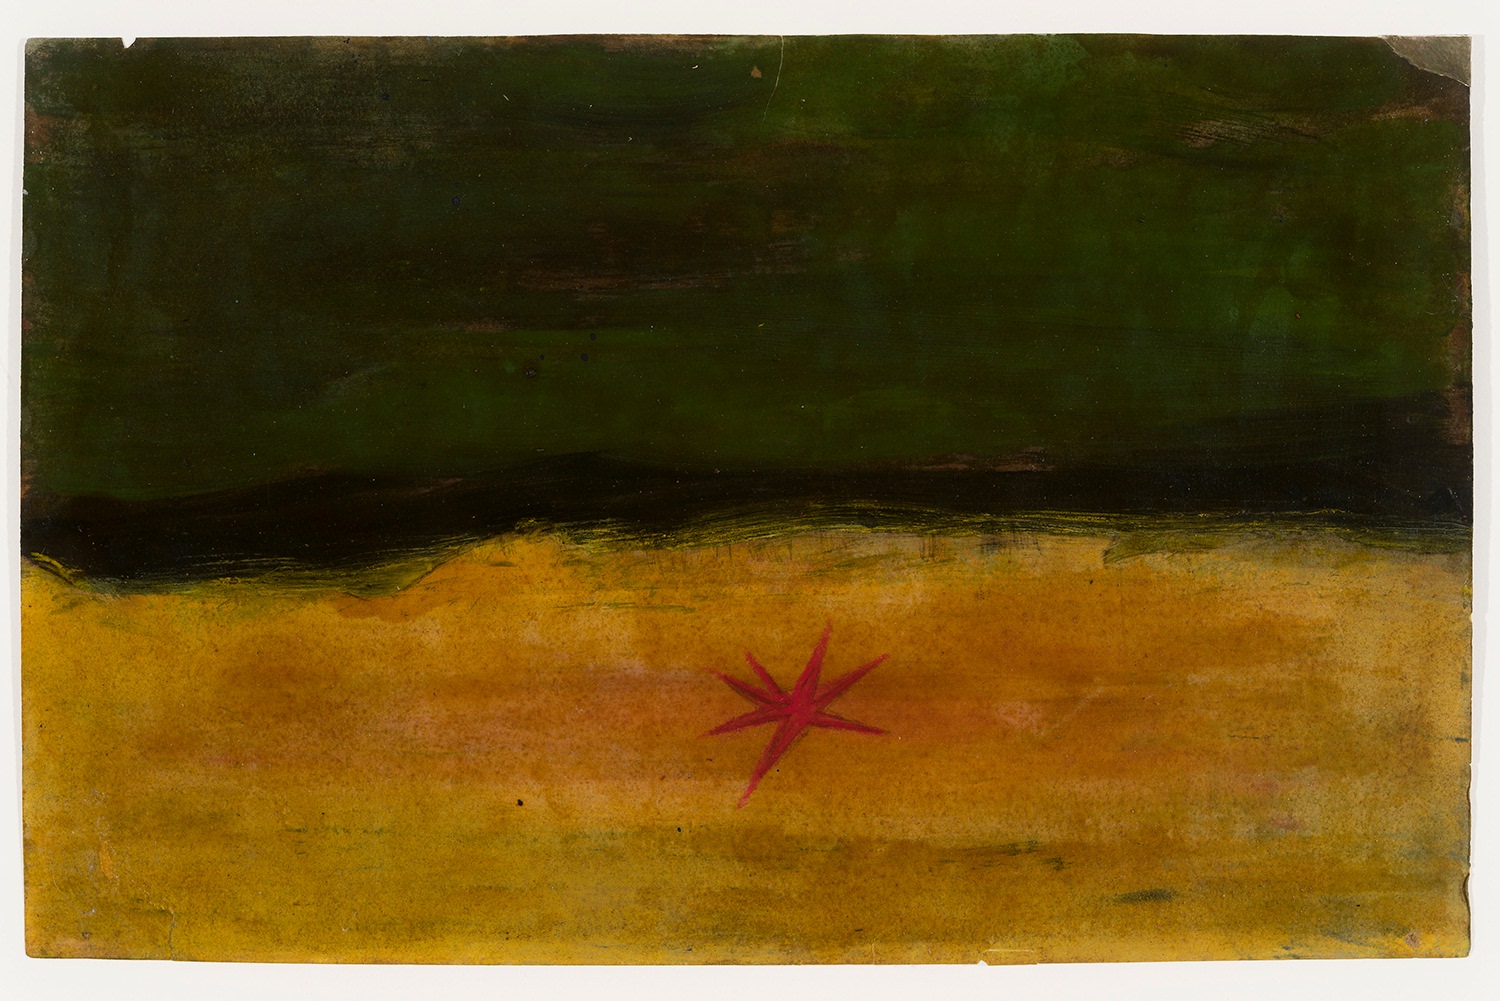 a painting by Frank Walter of a red starfish on a dark yellow beach with deep green water